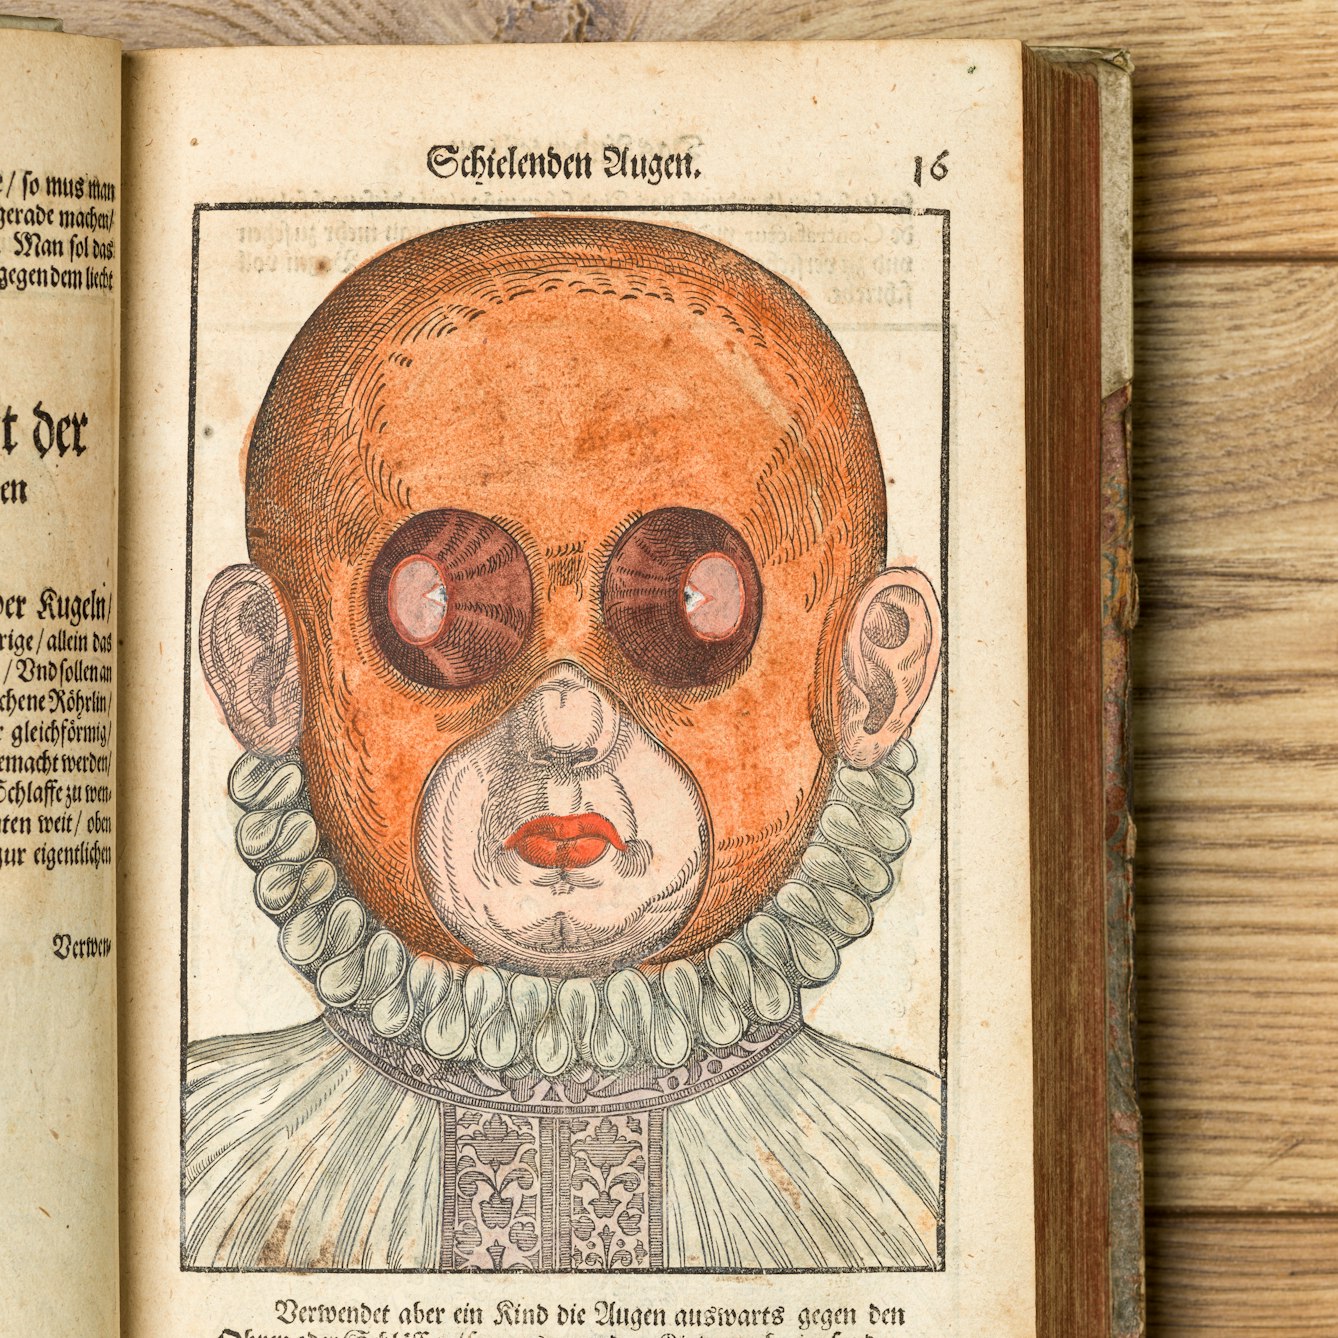 Photograph of an open book on a wooden background, showing a page with a coloured engraving from the 16th century depicting a person's head and neck ruff. On their head is a red mask which has small holes exposing the outside edges of their eyes and larger holes exposing their ears, nose and mouth.